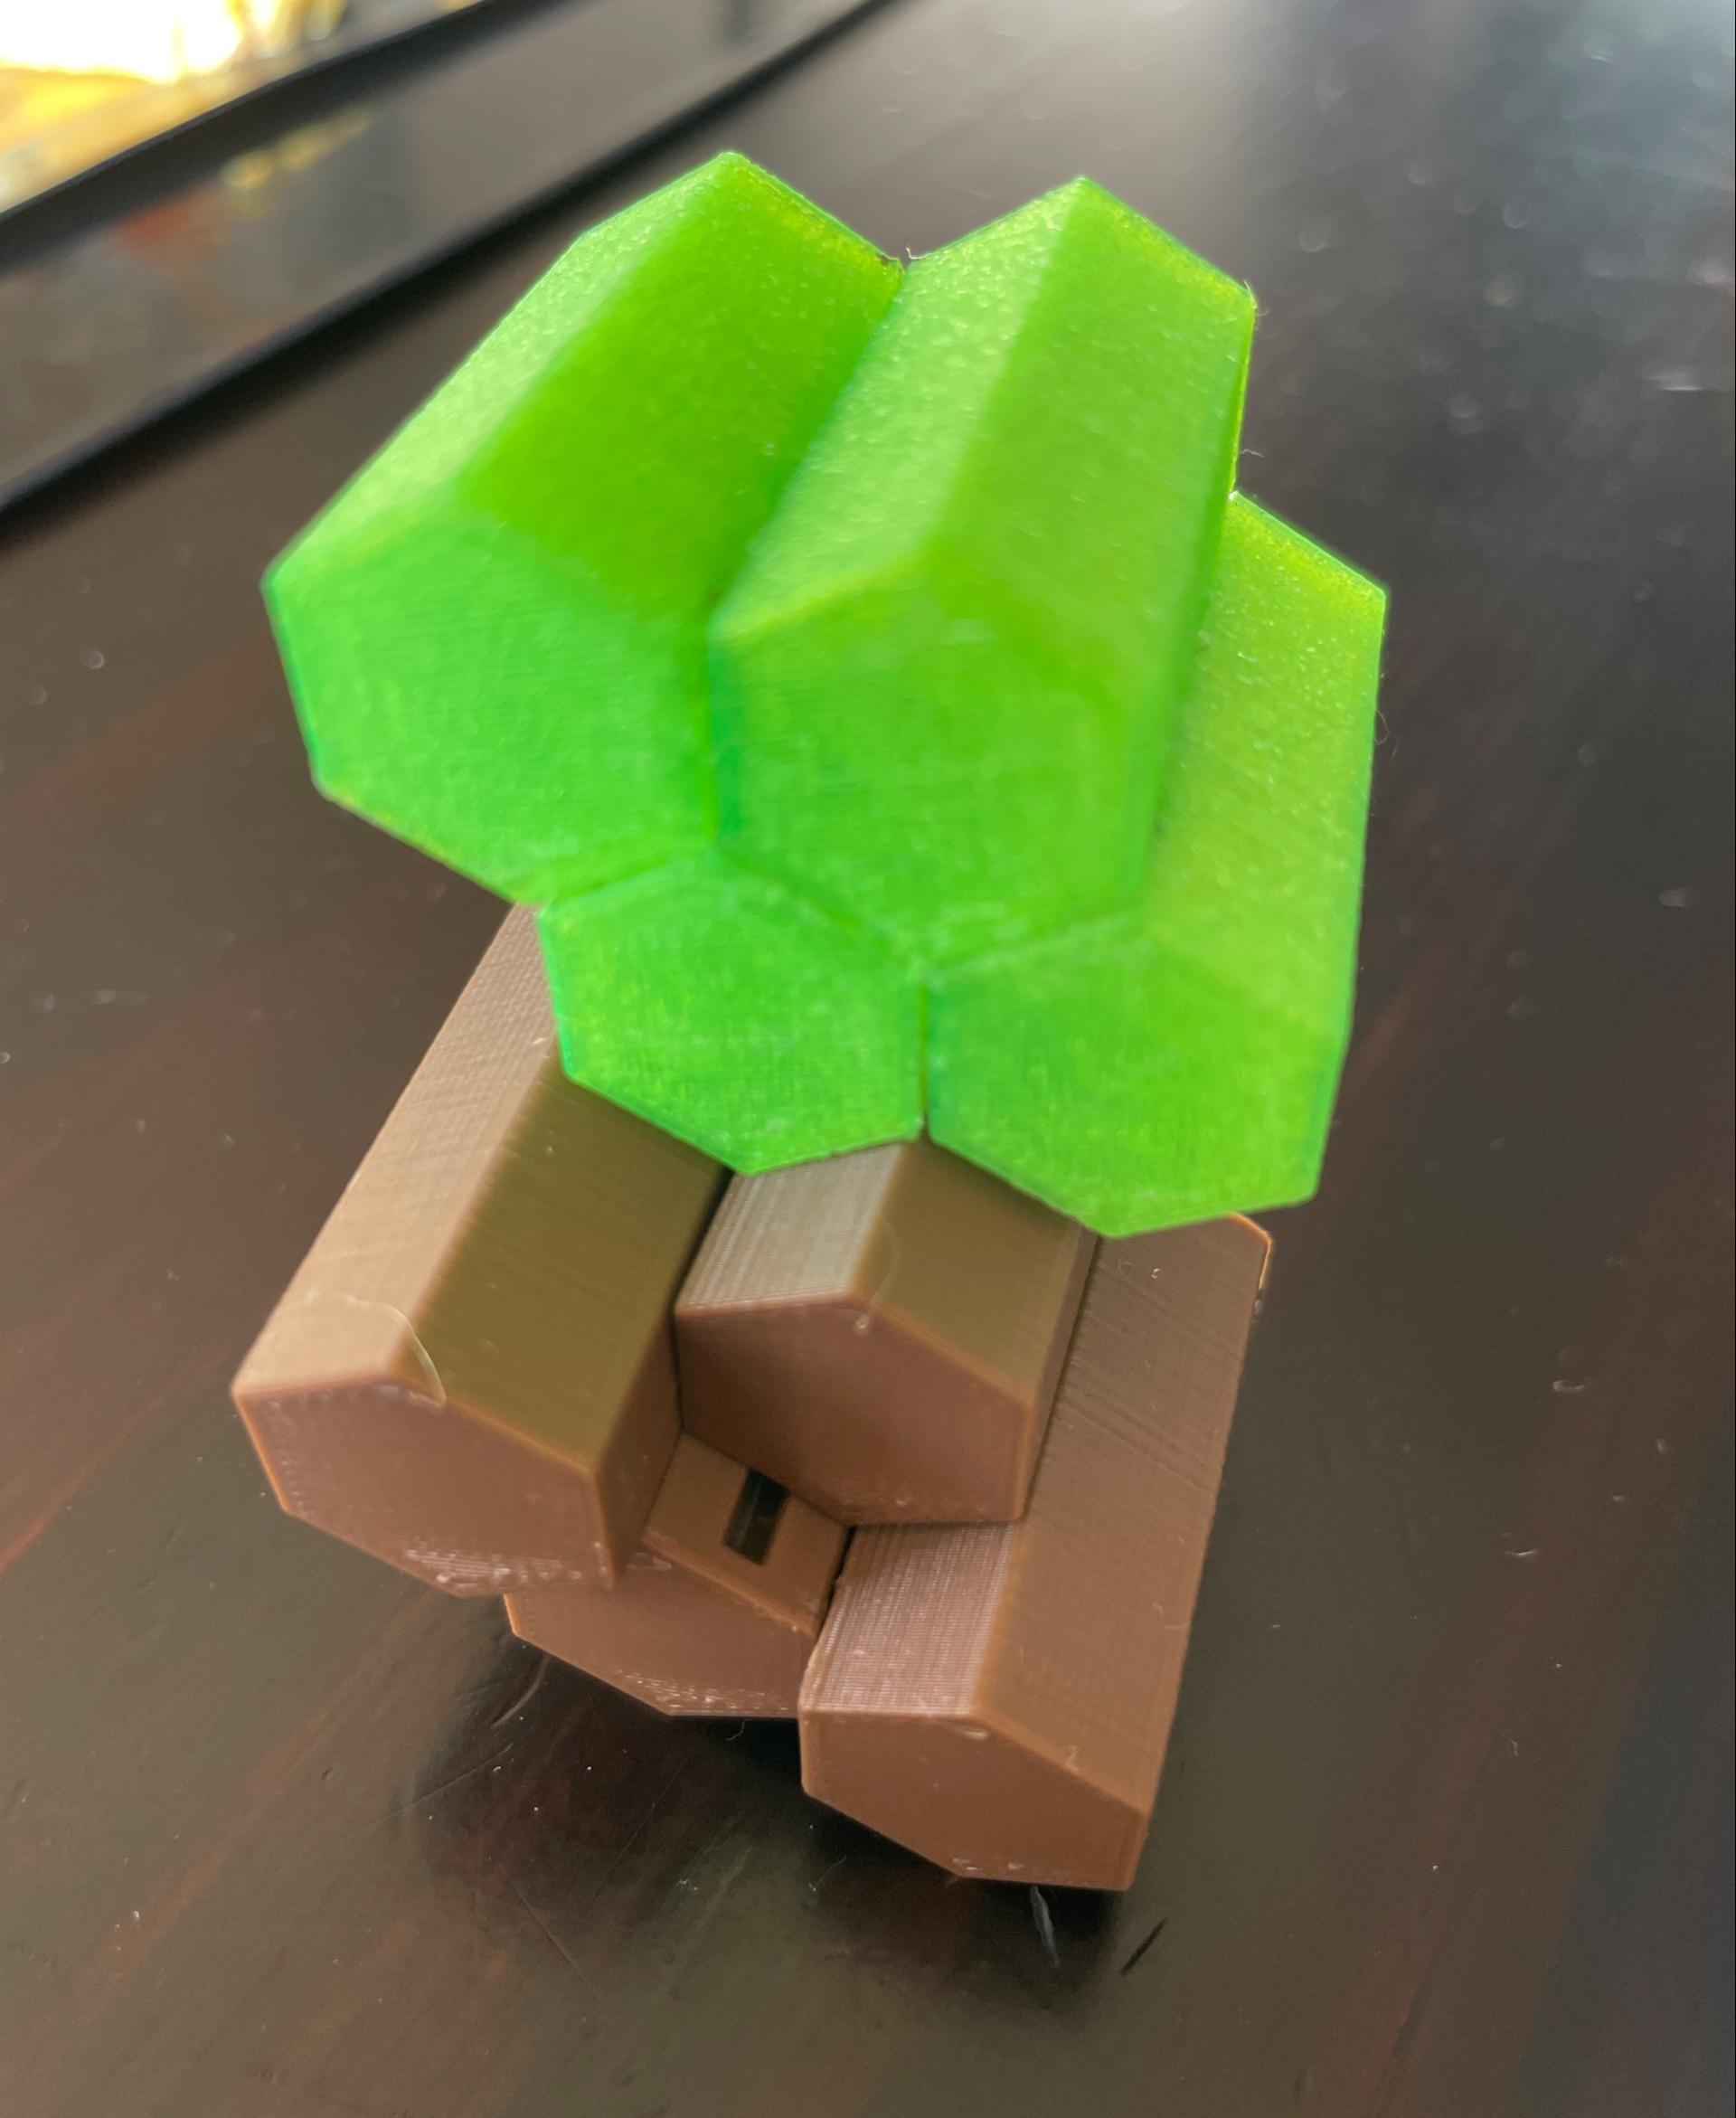 Fexahidget - fidget toy - My children are loving these. 
The brown one in PLA got sliding ok, the PETG attempt in green hasn’t, so definitely trying your next model with different tolerances. 
Maybe one day I’ll learn how to tweak slice settings myself to adjust for different materials. - 3d model